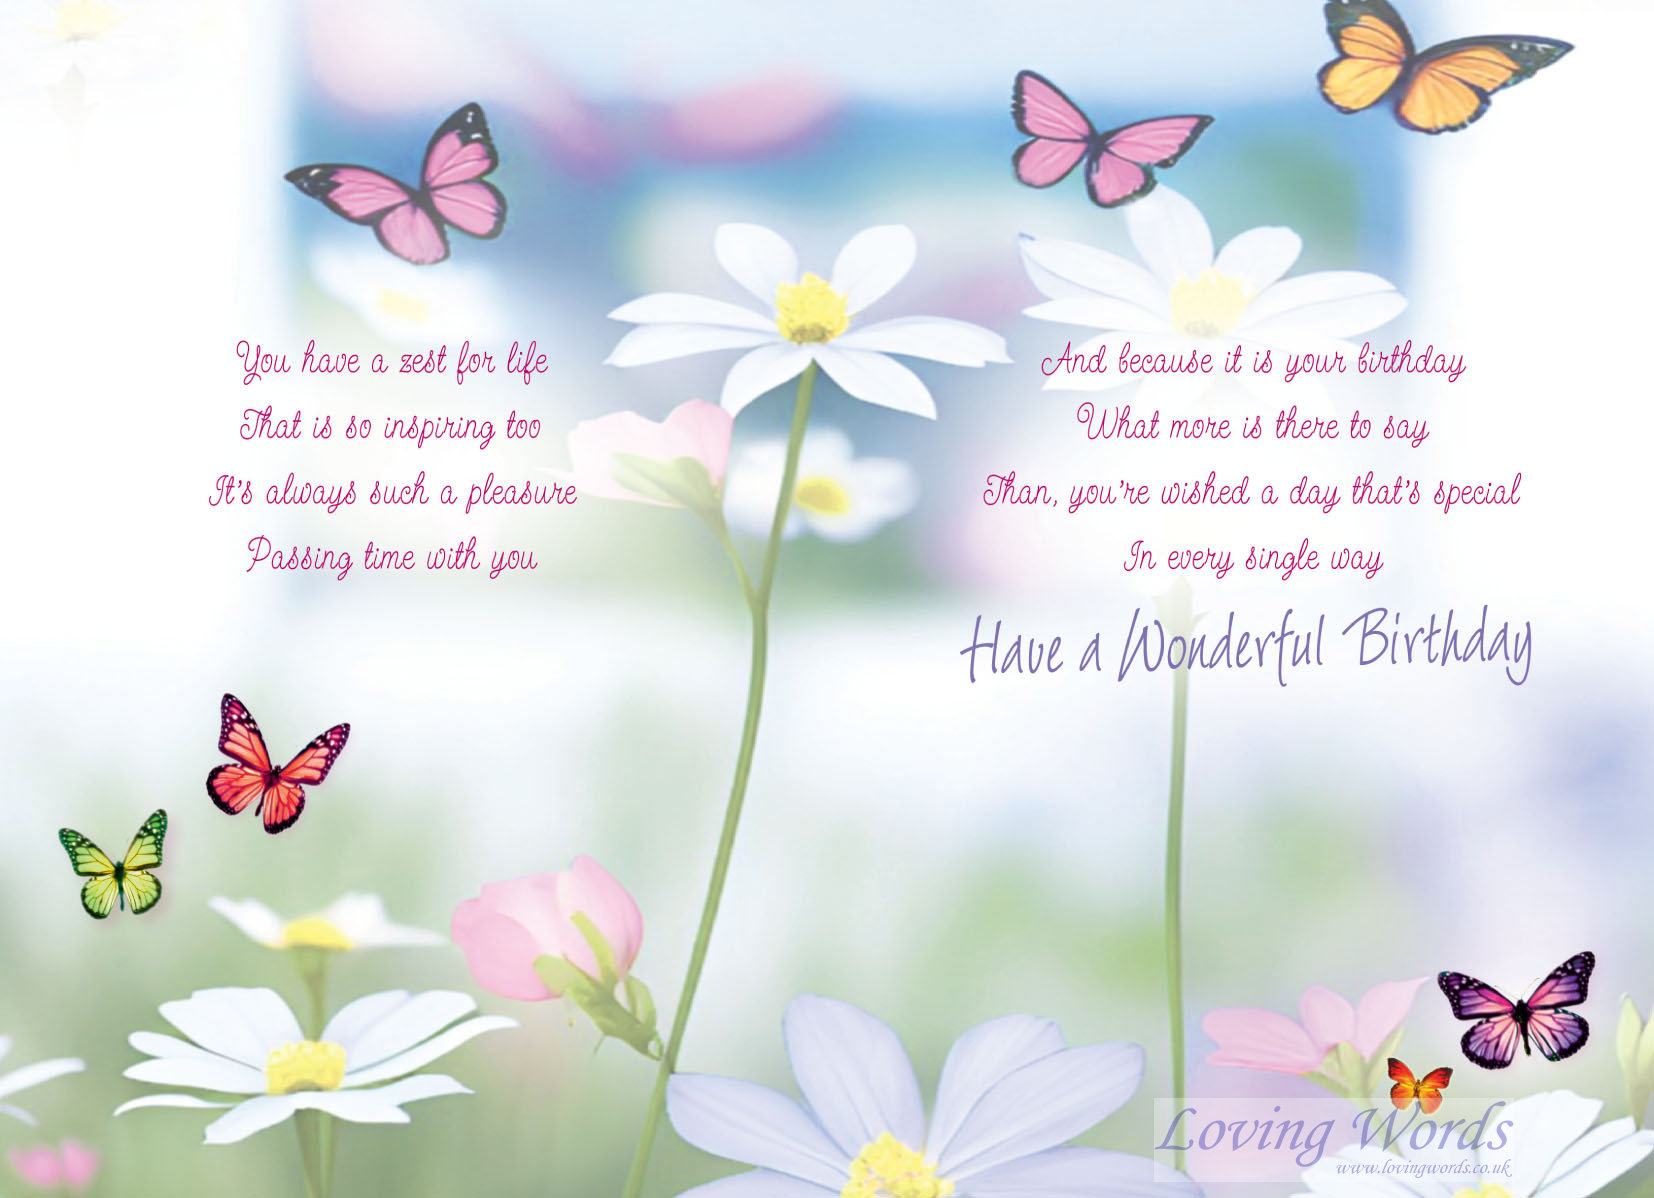 Especially for you on your Birthday | Greeting Cards by Loving Words